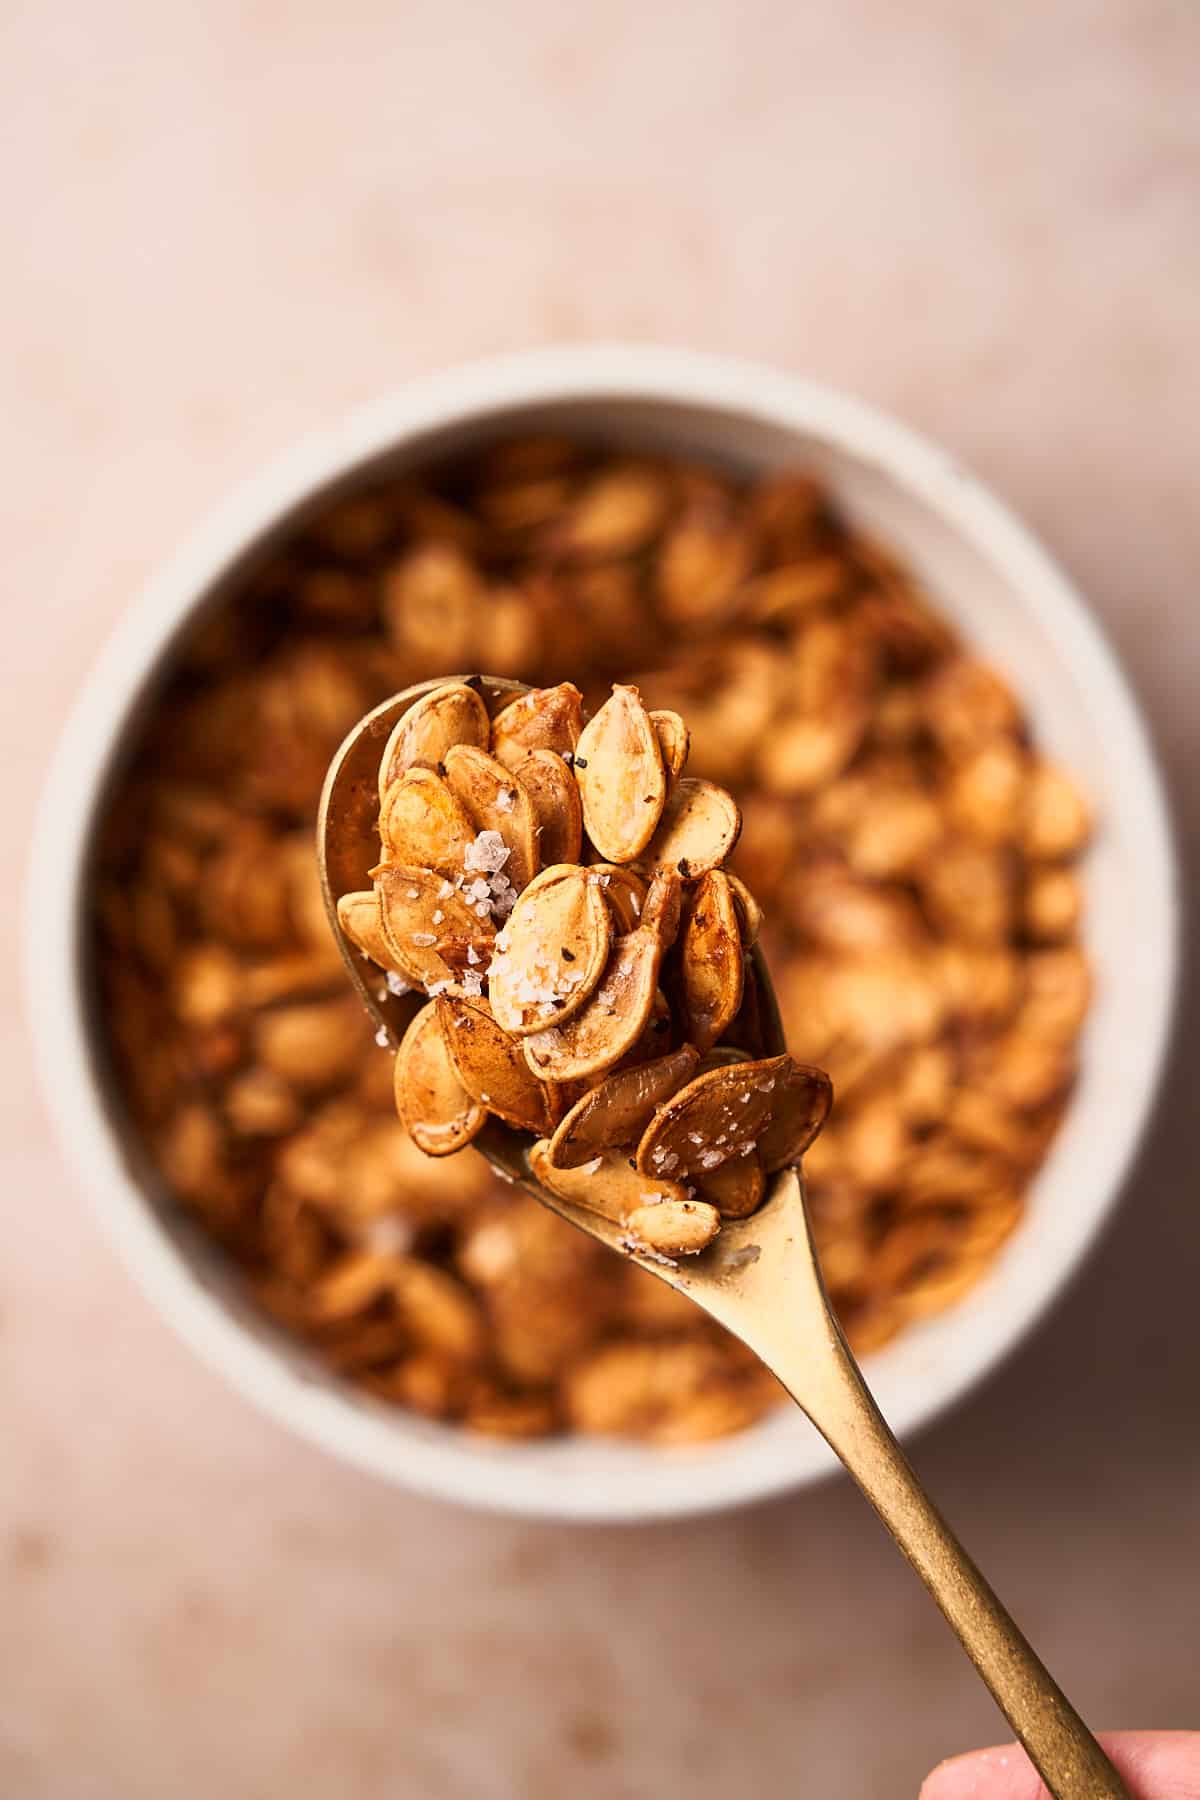 Salted air fryer pumpkin seeds on a golden spoon, held over a bowl of seeds.